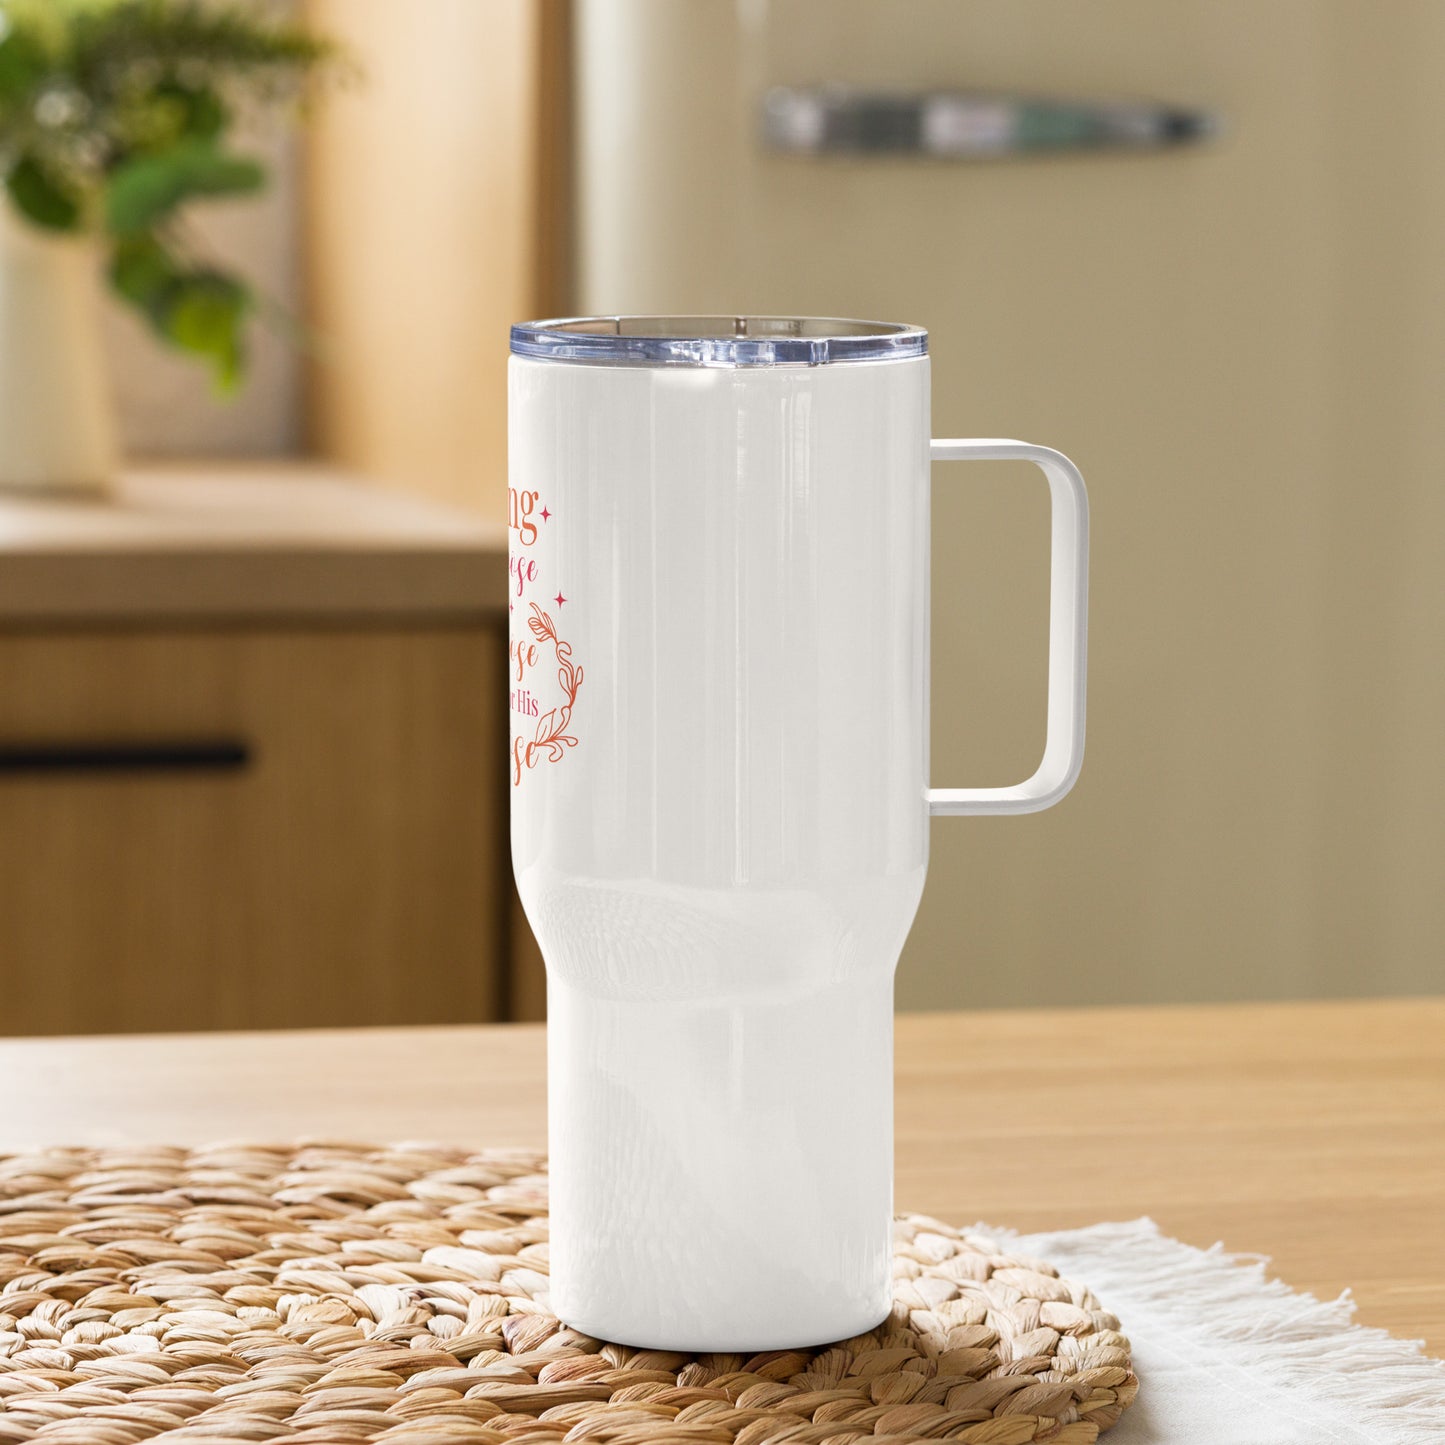 Walking In Purpose On Purpose For His Purpose Christian Travel mug with a handle